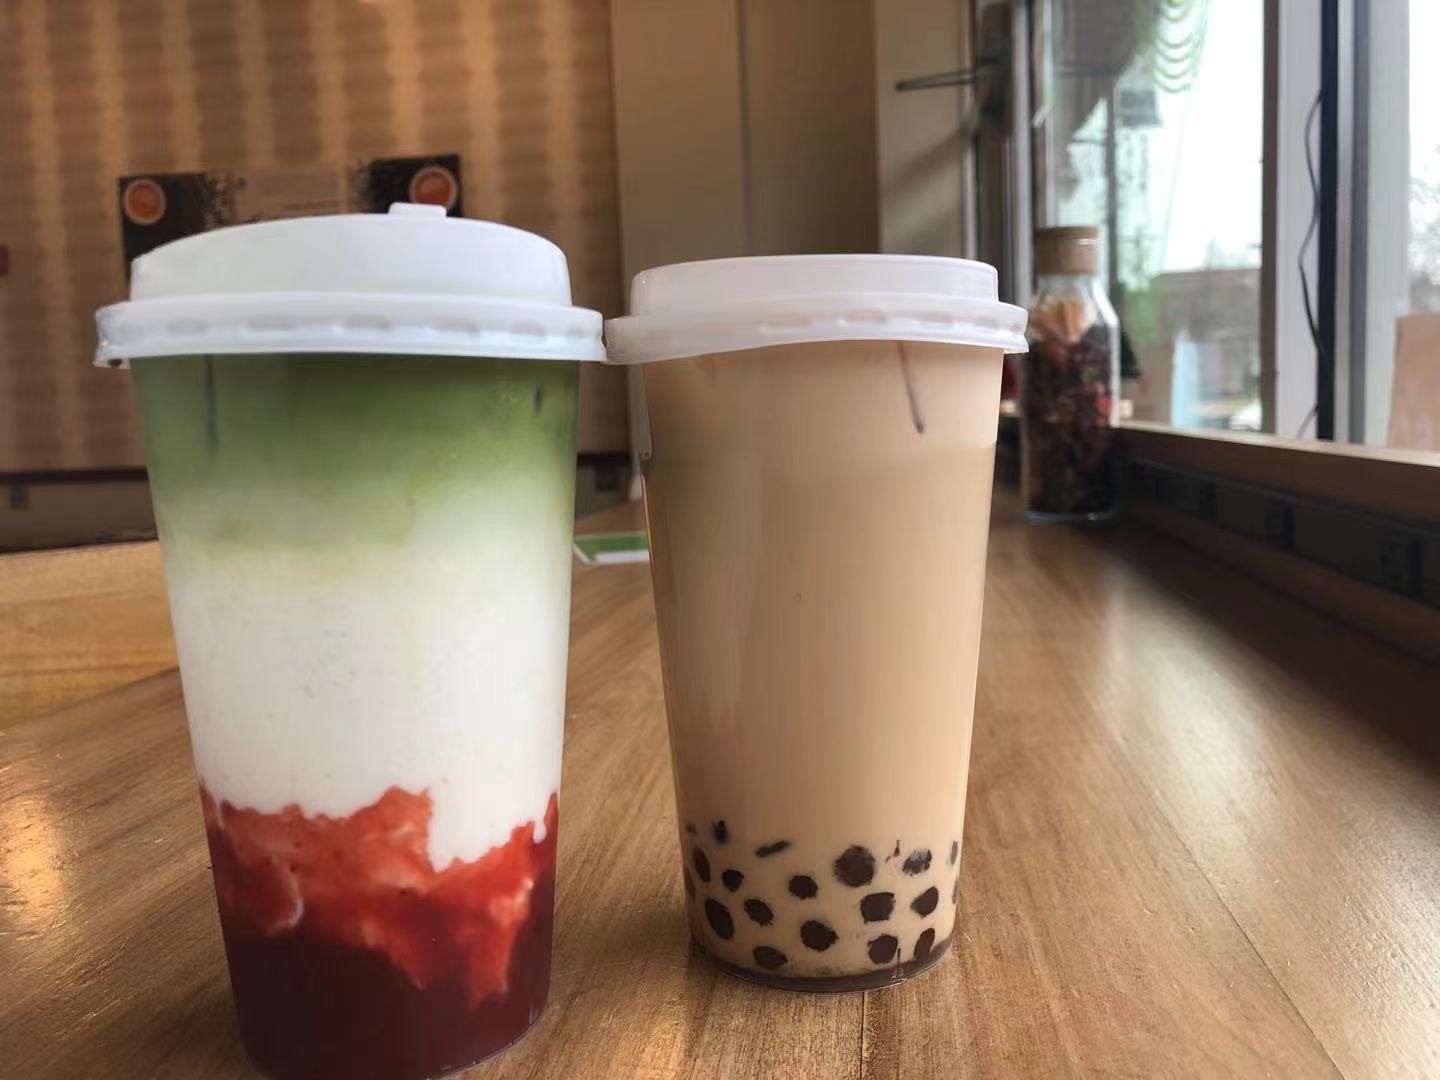 On a wooden table, there are two boba tea drinks in to go plastic cups with white plastic coffee covers. Photo by Xiaohui Zhang.